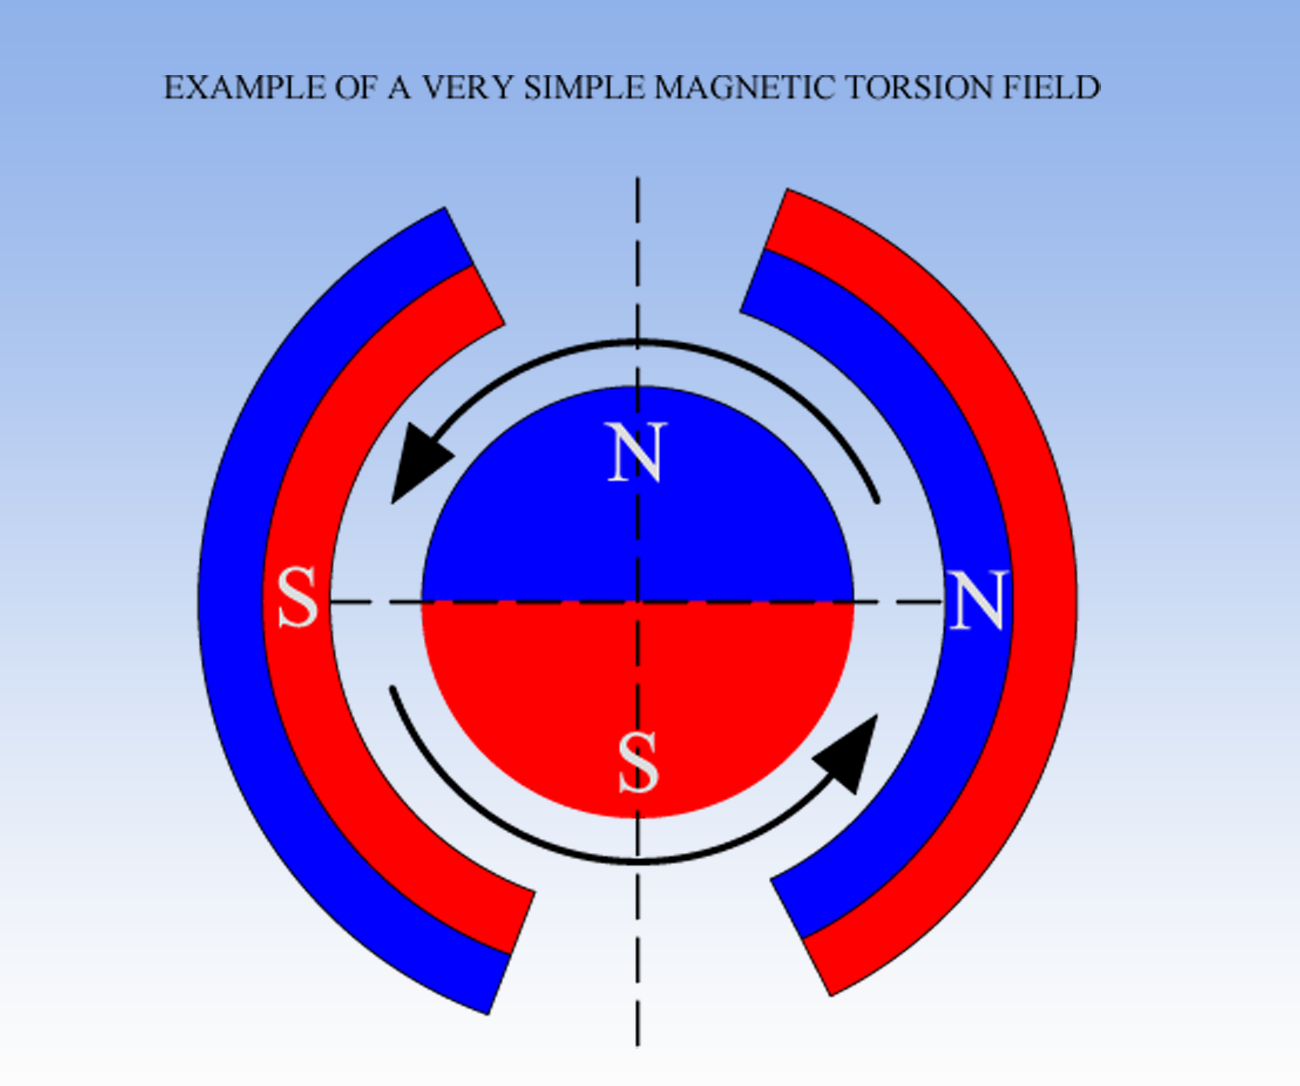 SIMPLE_MAGNETIC_TORSION_FIELD.png